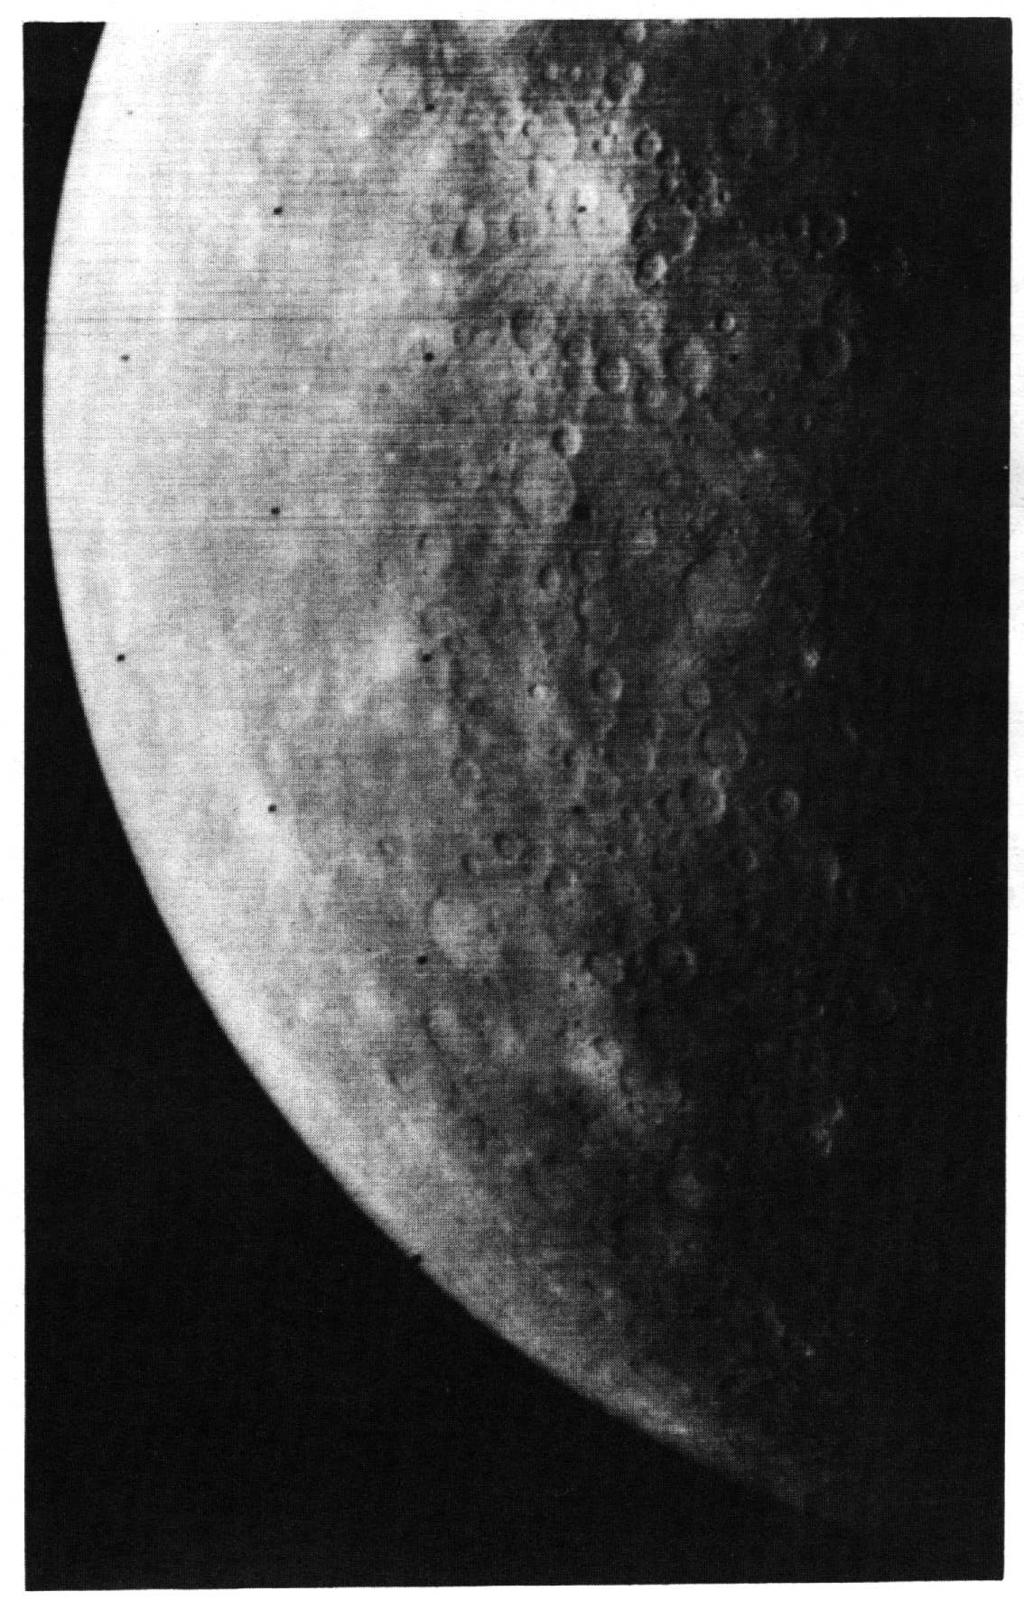 BOTTOM An abundance of craters near the evening terminator can be seen in this picture of Mercury taken by one of Mariner 10's two television cameras.